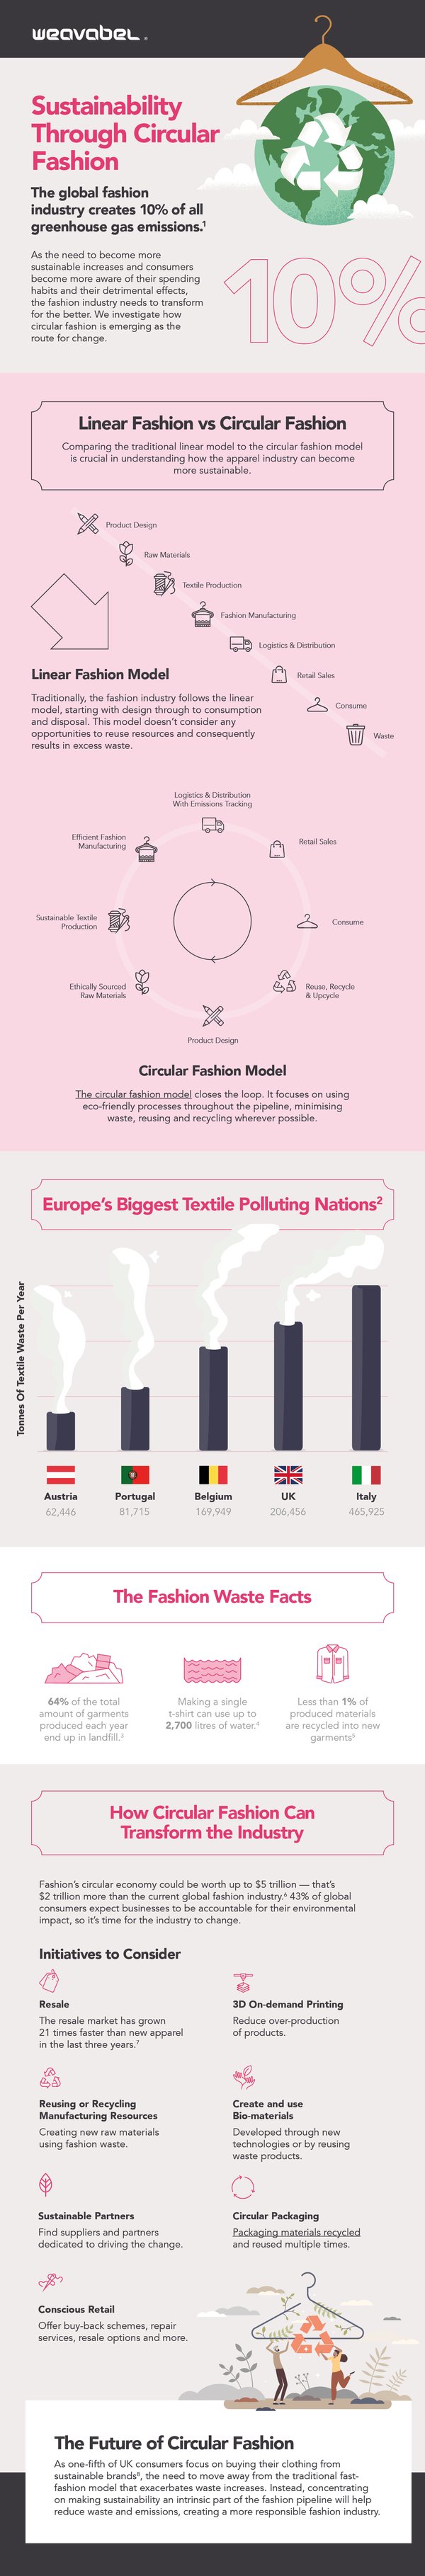 sustainable fashion infographic